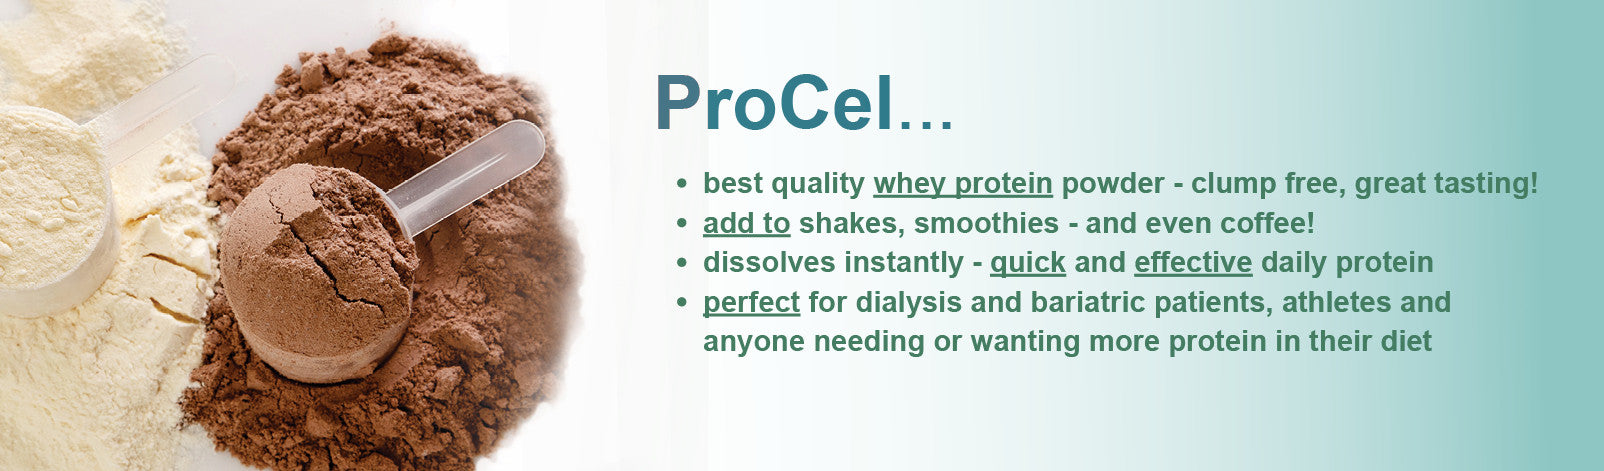 ProCel Powdered Whey Protein in Vanilla and Chocolate